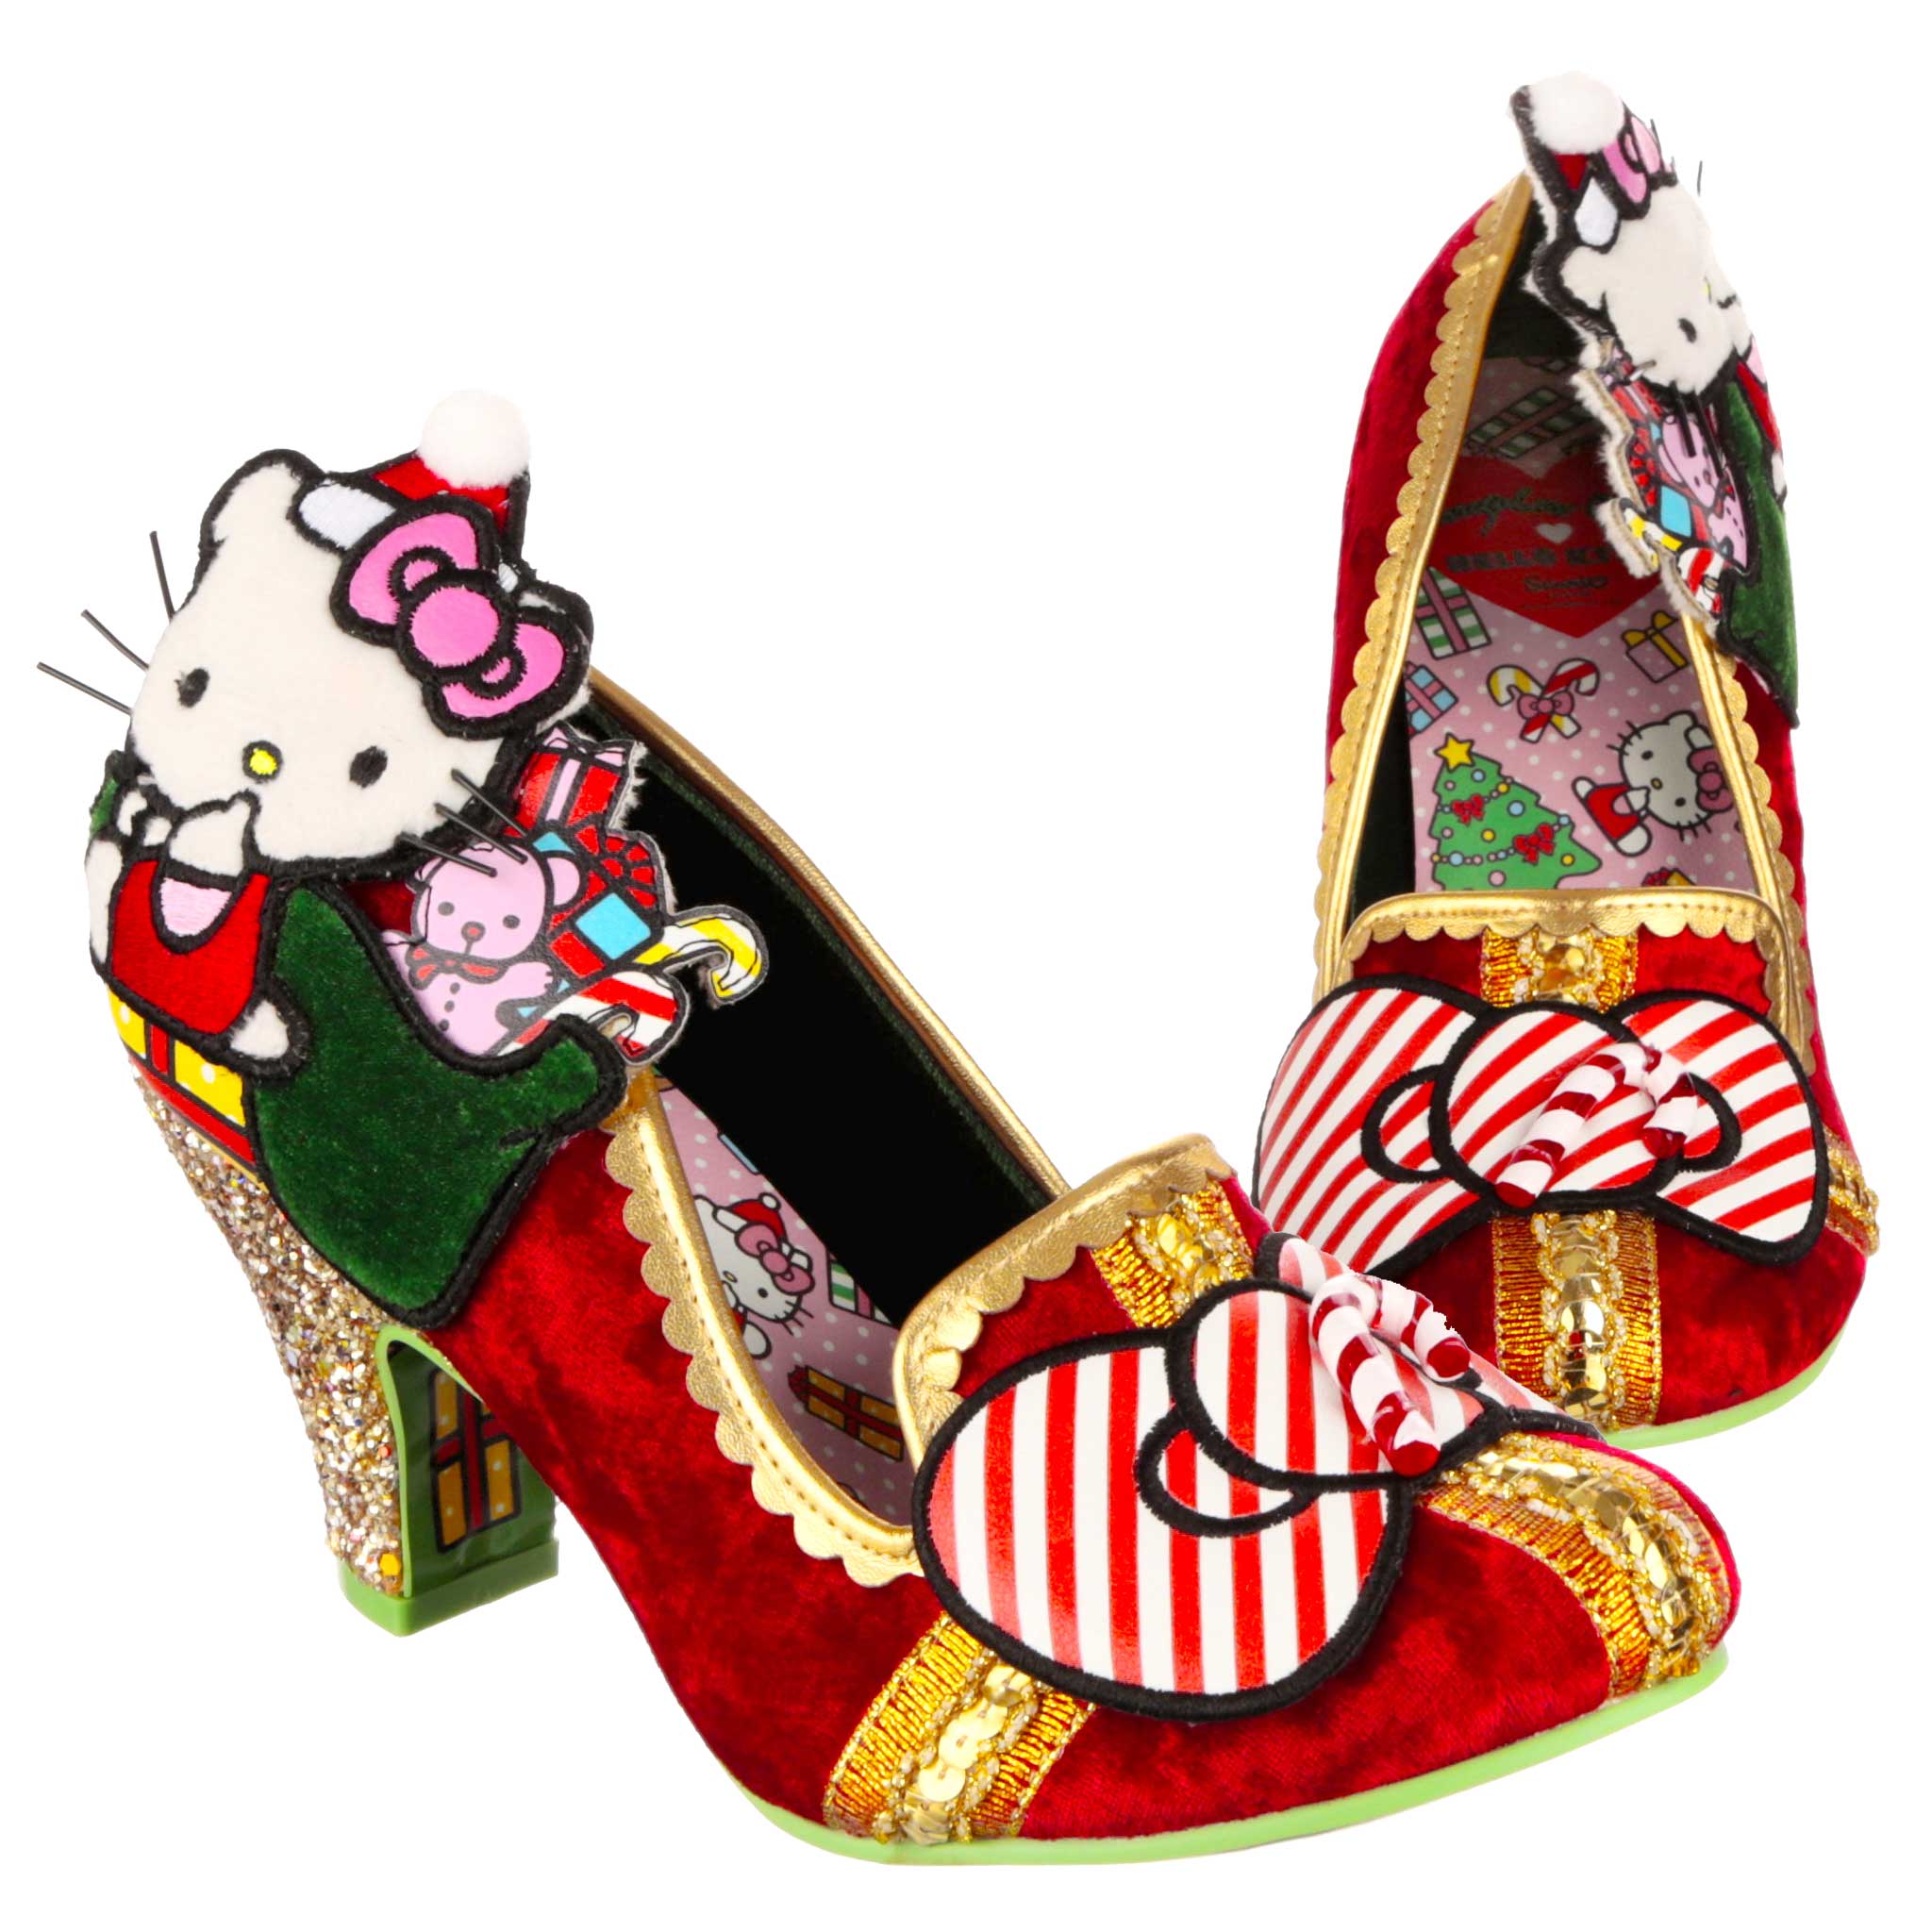 Irregular Choice x Hello Kitty Star Of The Show Heels in Blue